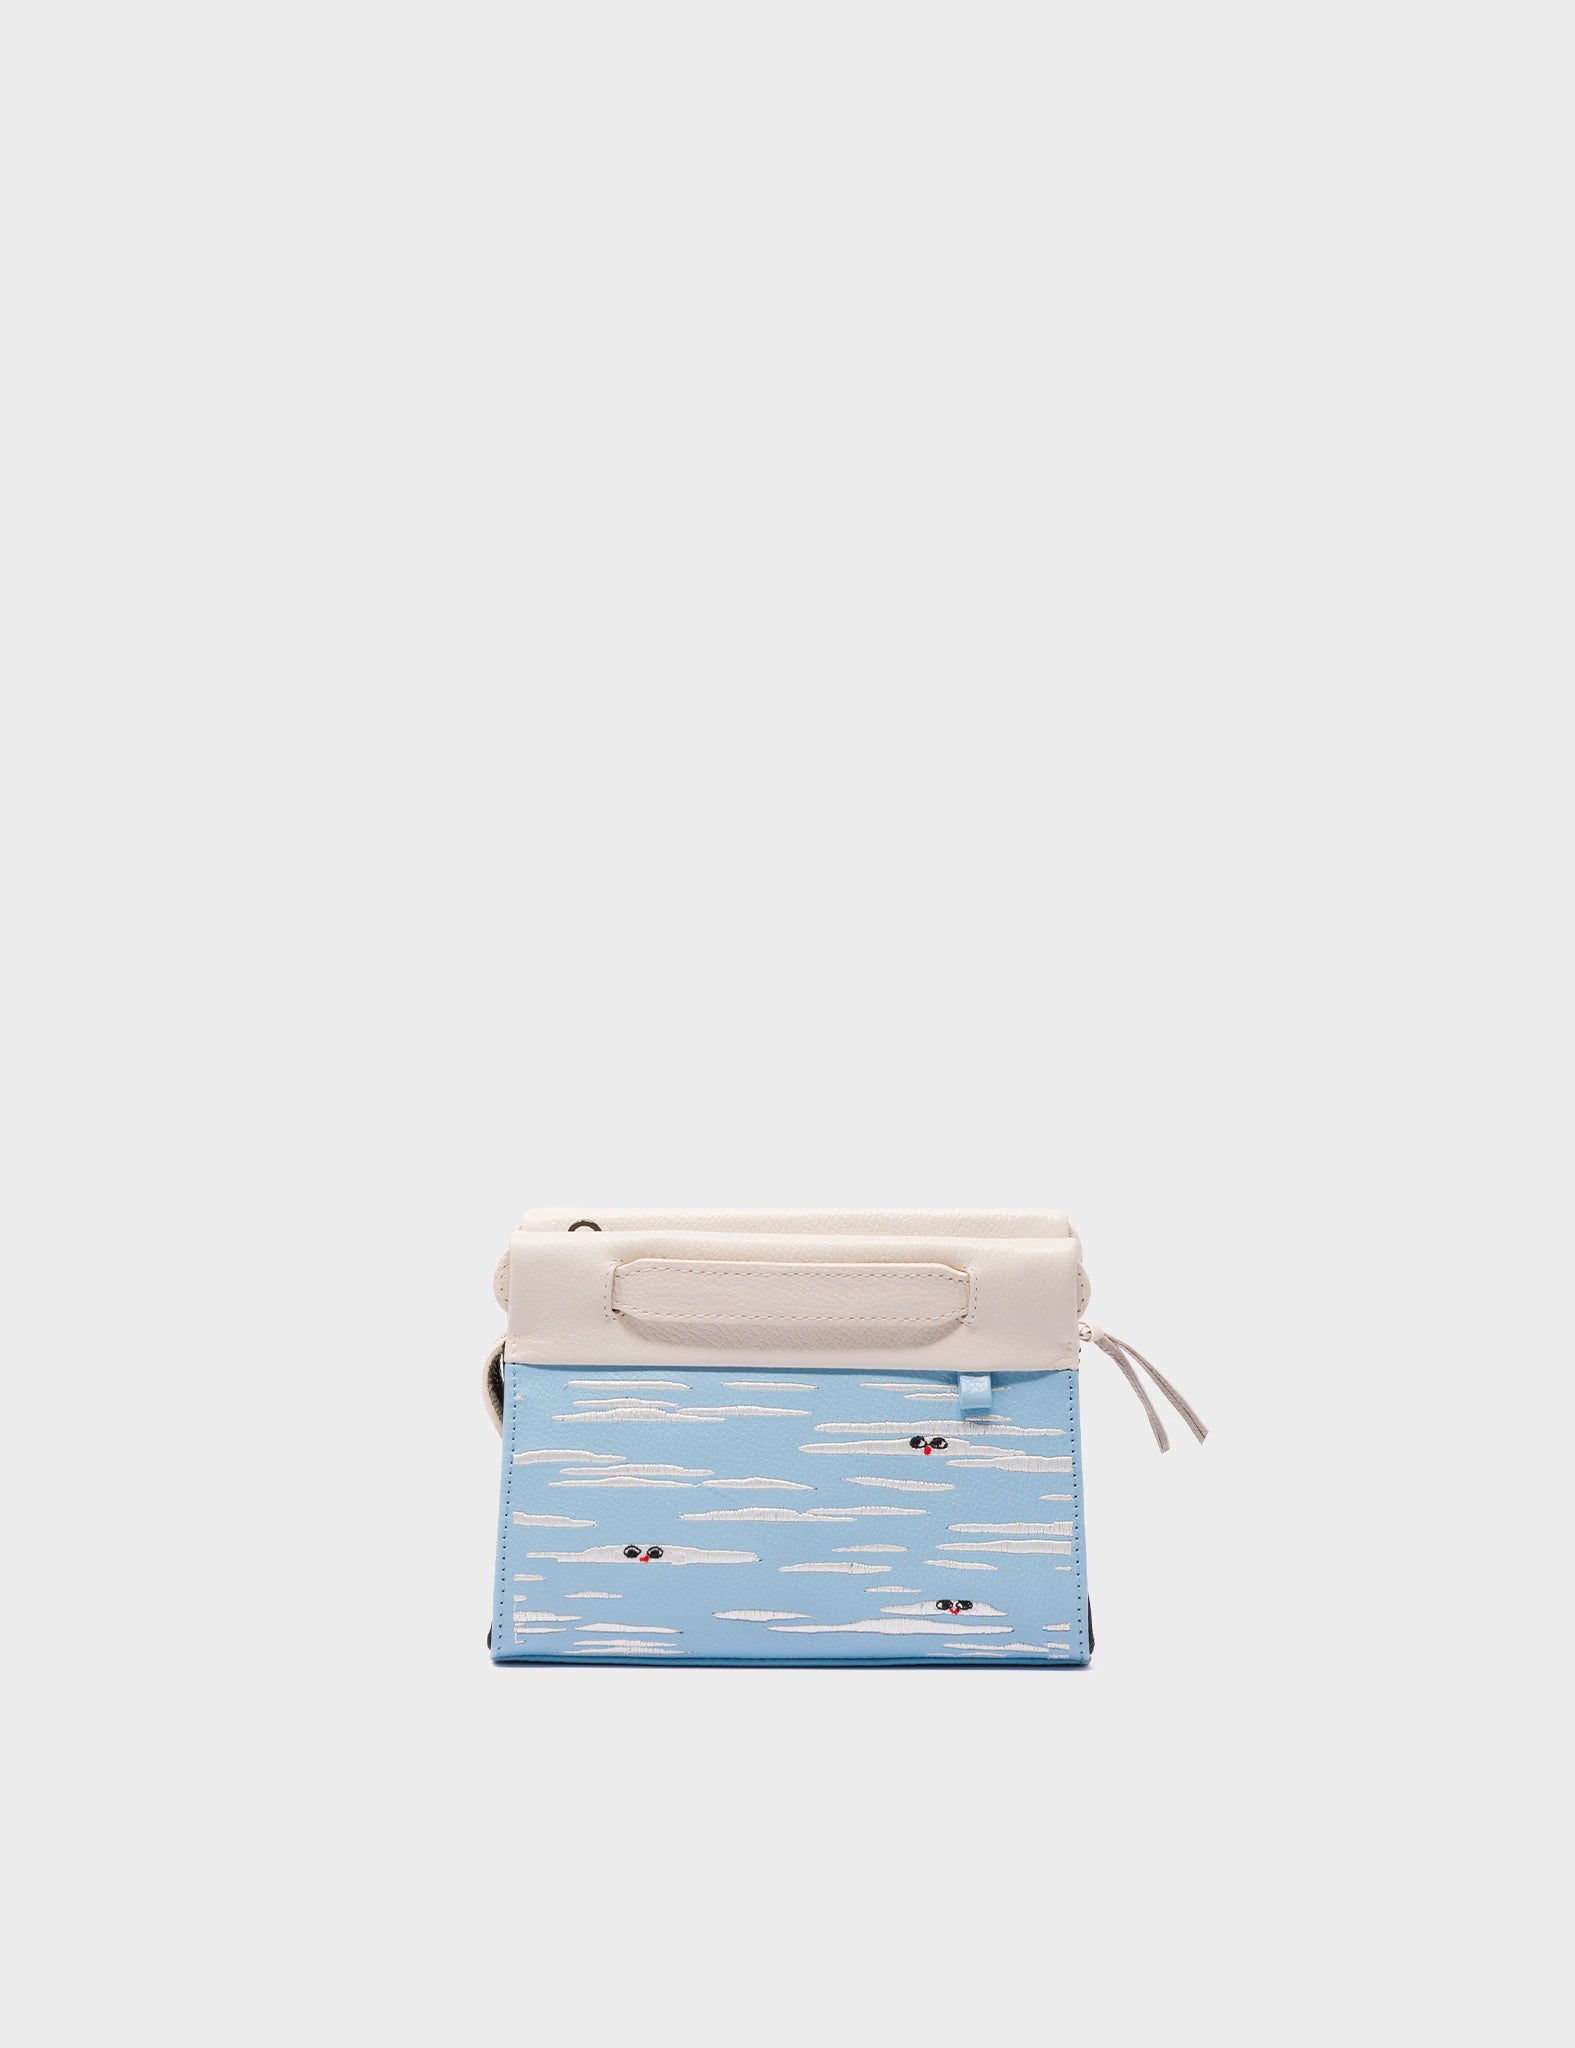 Crossbody Micro Blue Leather Bag - Clouds Embroidery - Front